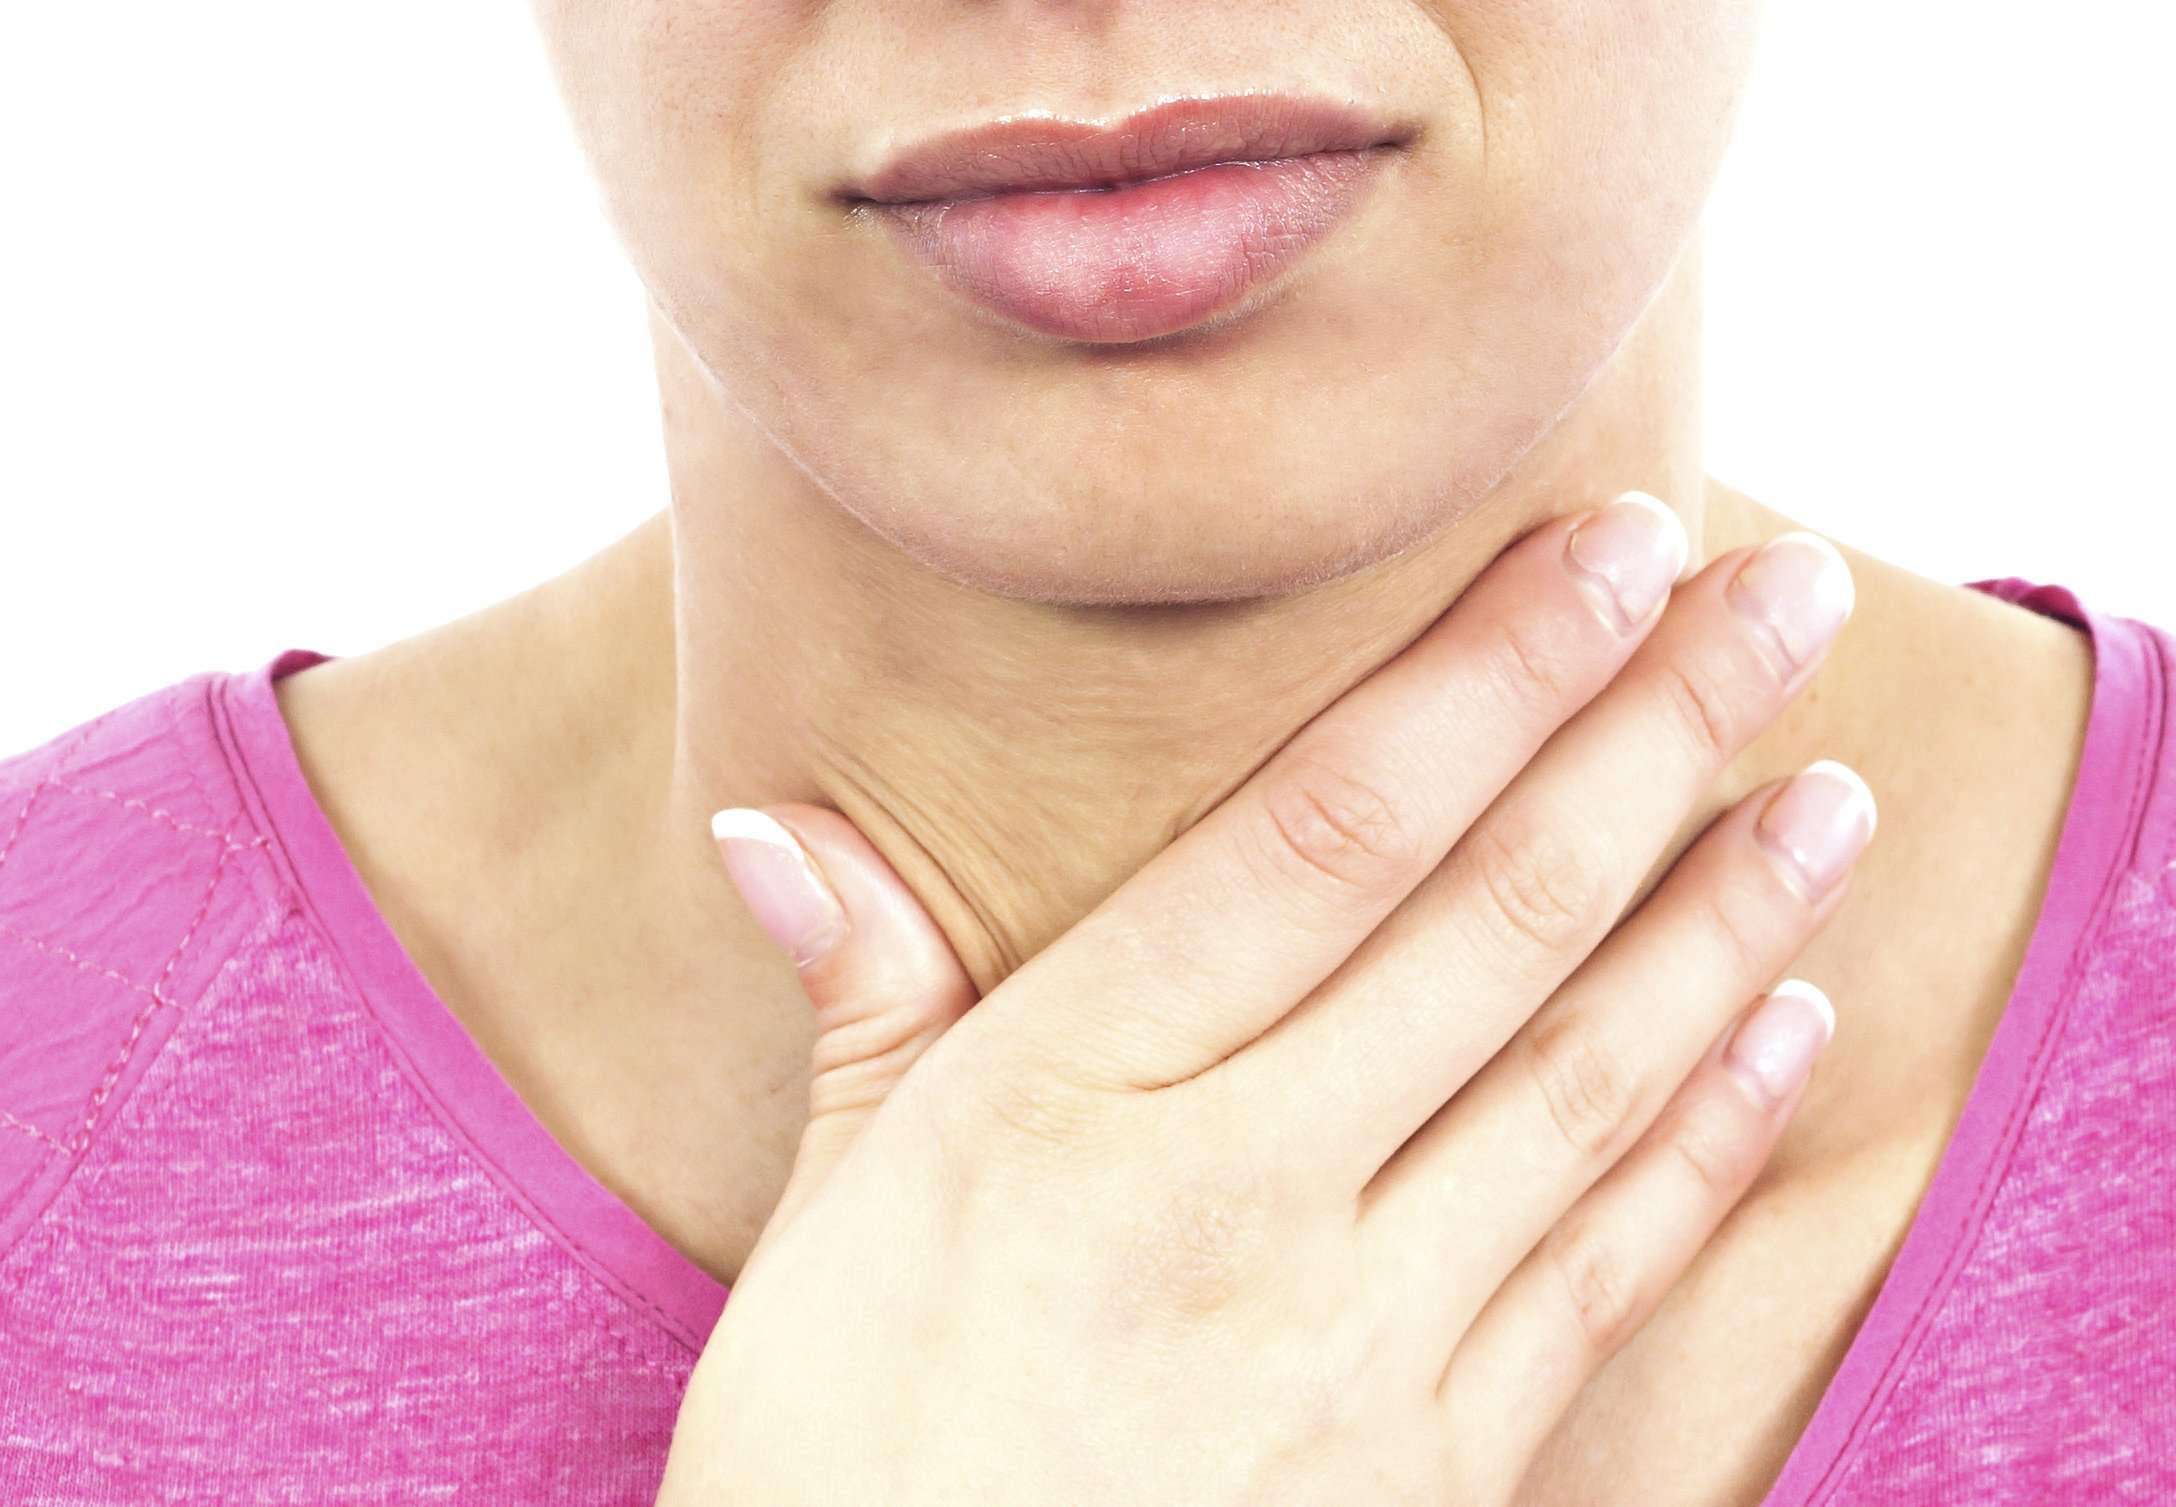 How to Tell If You Have Strep Throat or a Cough (Video)